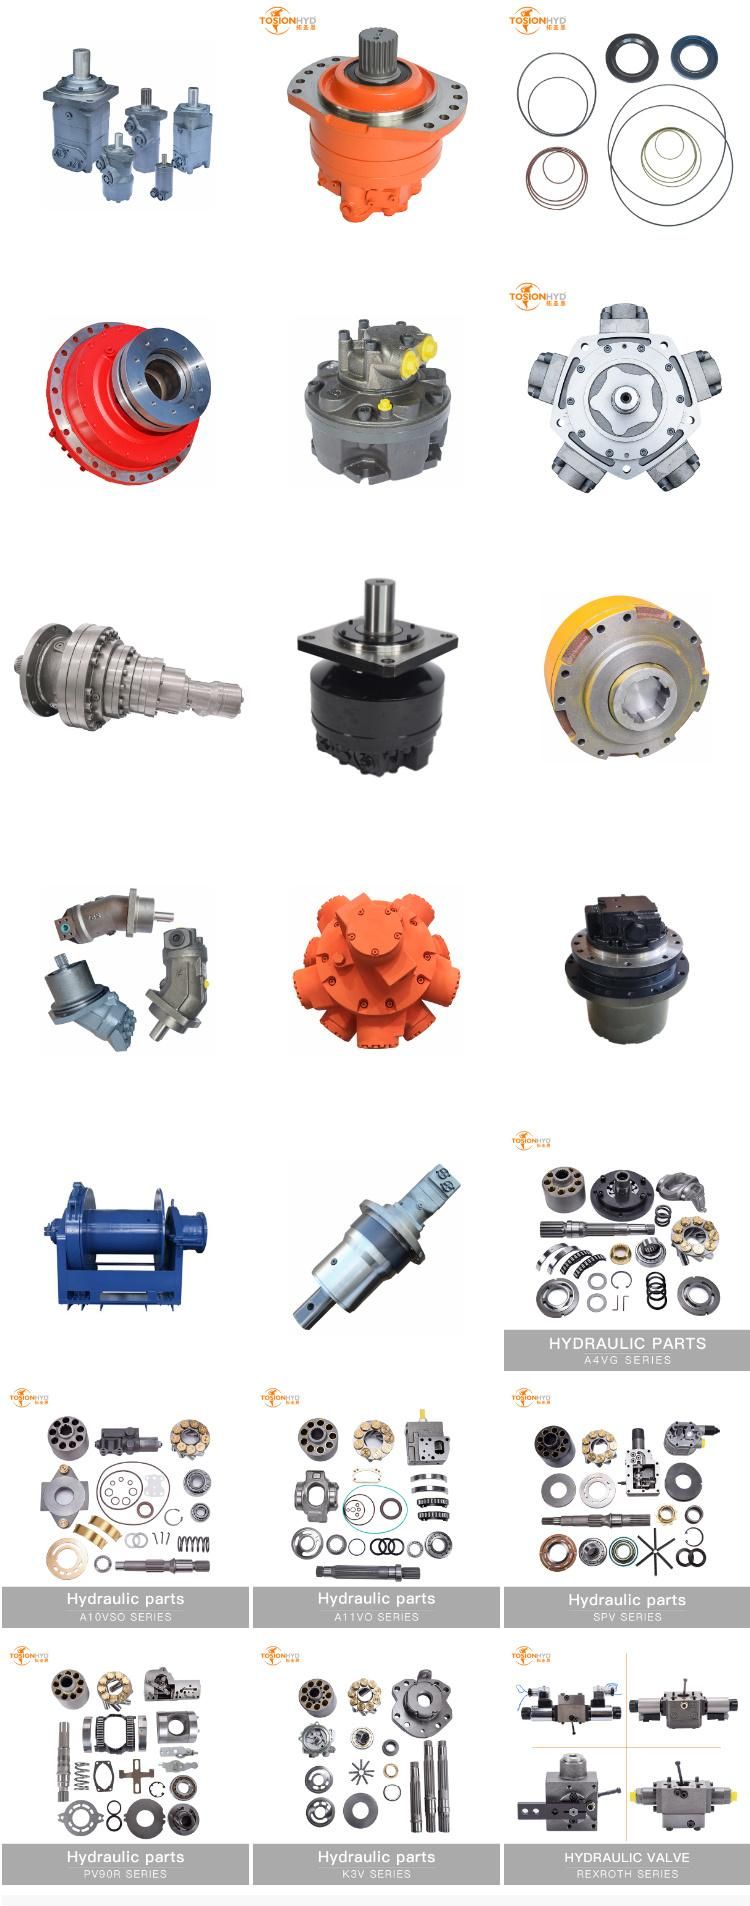 Spv10/10 Ms180-8 Ms180LC-8 Ms180lcs-8 Excavator Hydraulic Pump Spare Parts with Cat